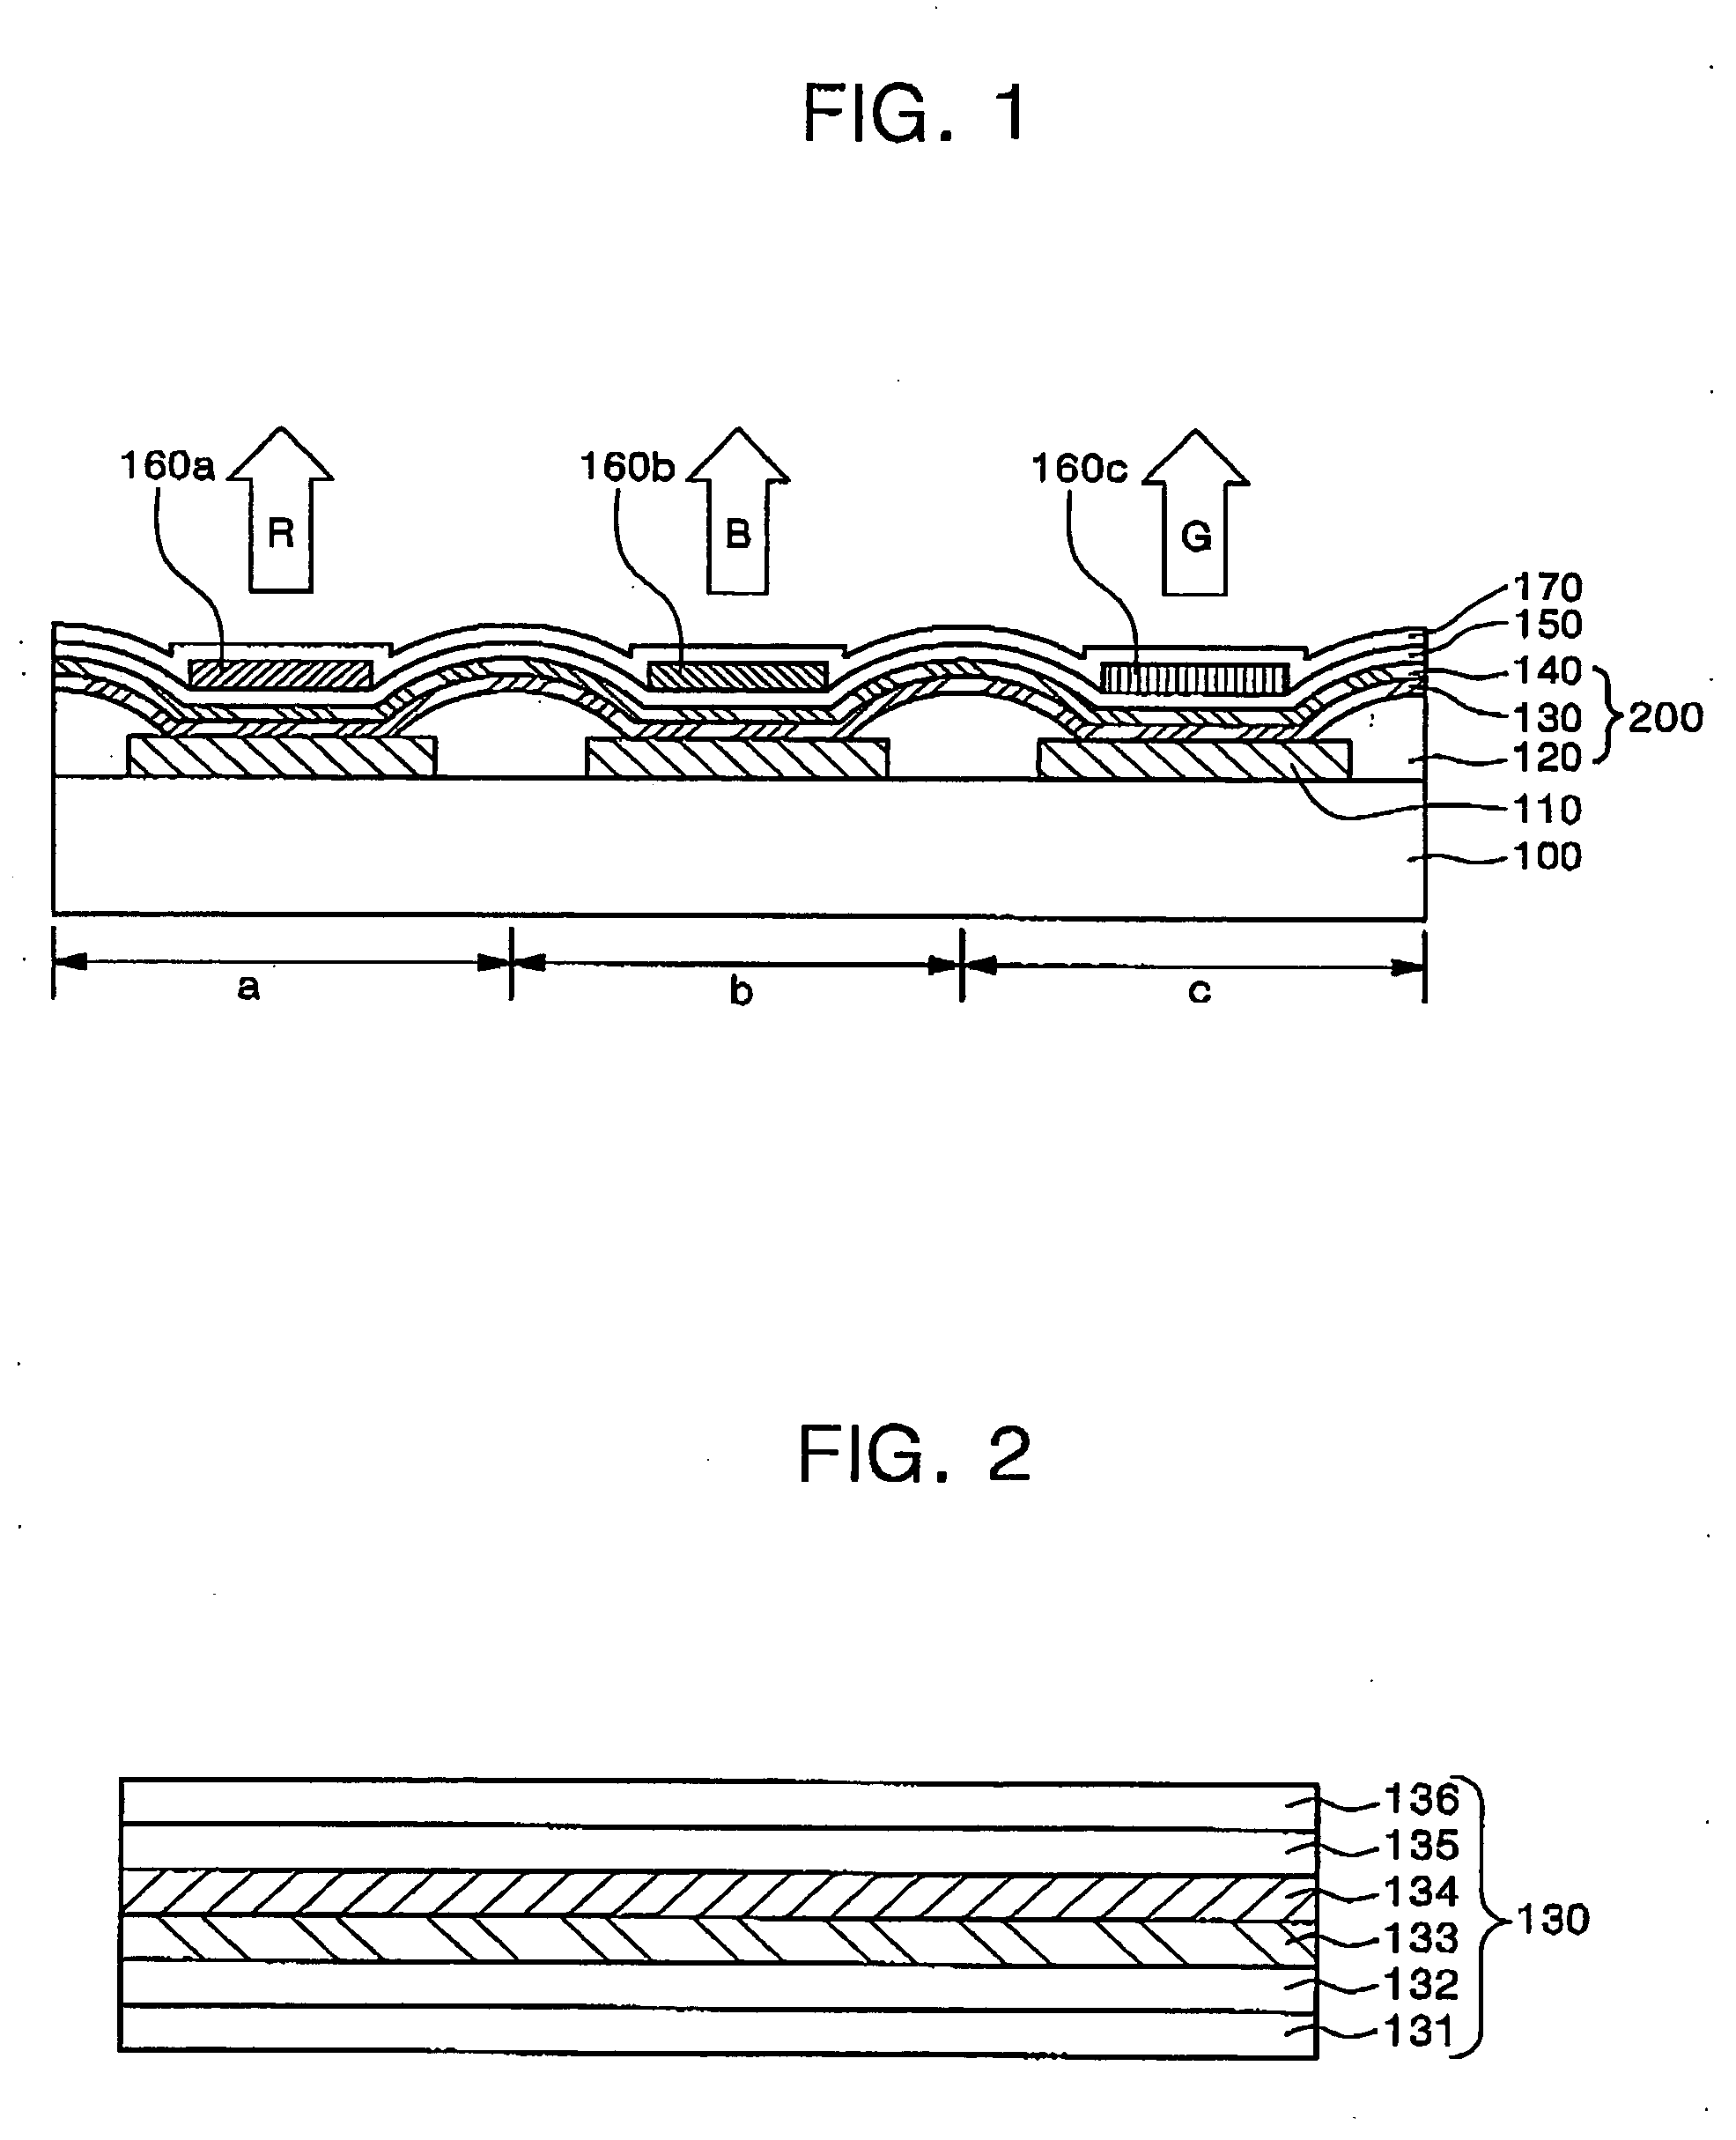 Full-color electroluminescent display device and method of fabricating the same